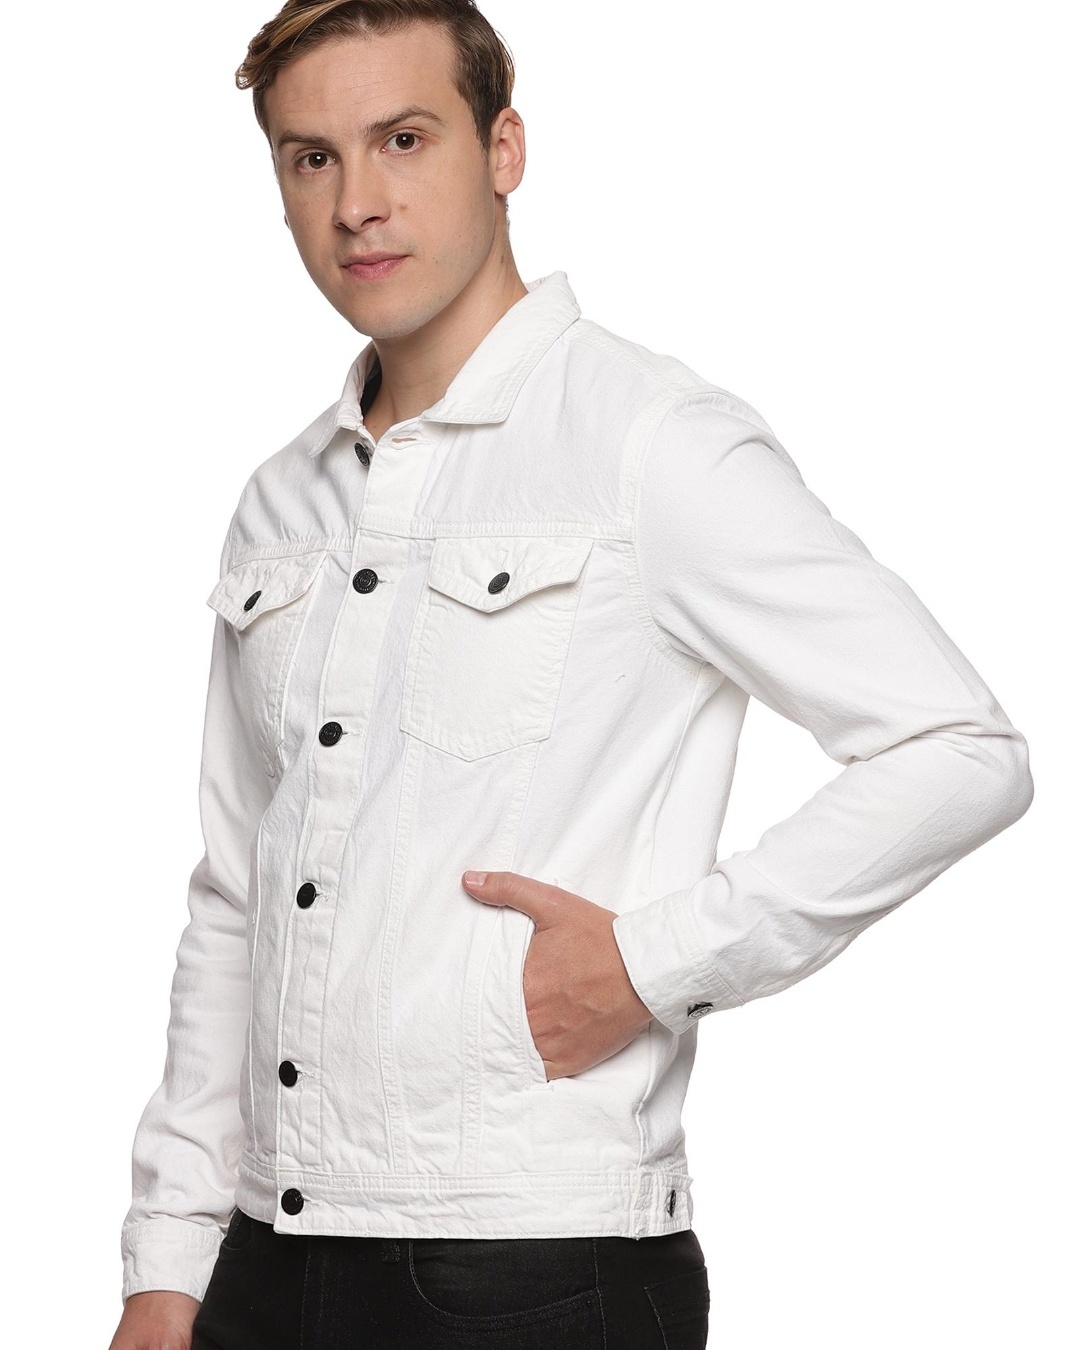 Black Denim Jacket With Light Blue Denim And Plain White T-shirt With White  Background, Black Denim Jacket With Light Blue Denim And Plain White  T-shirt With White Background Stock Photo, Picture and